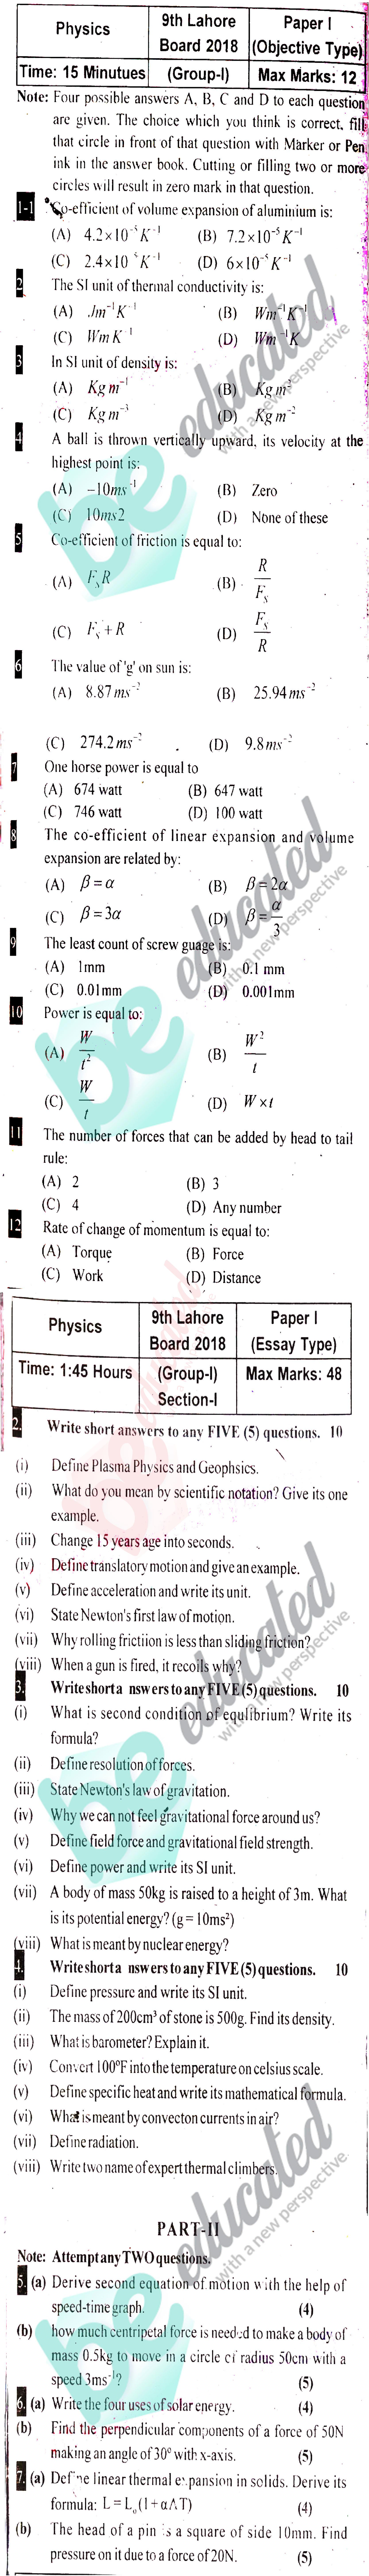 Physics 9th Class English Medium Past Paper Group 1 BISE Lahore 2018